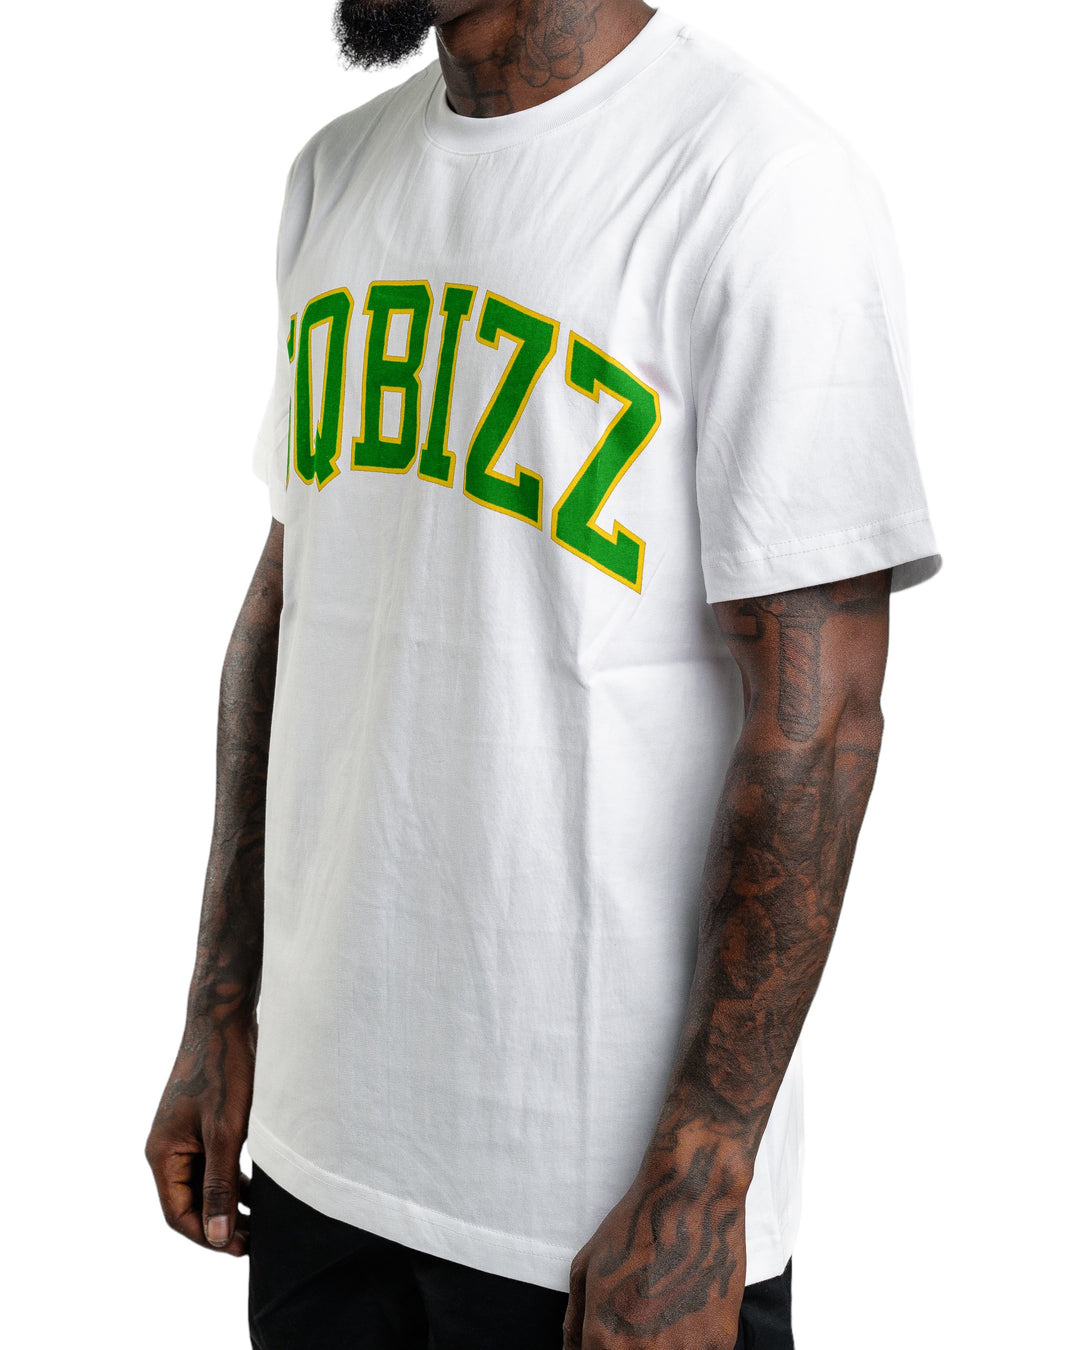 Arch Tee in White/Green/Yellow